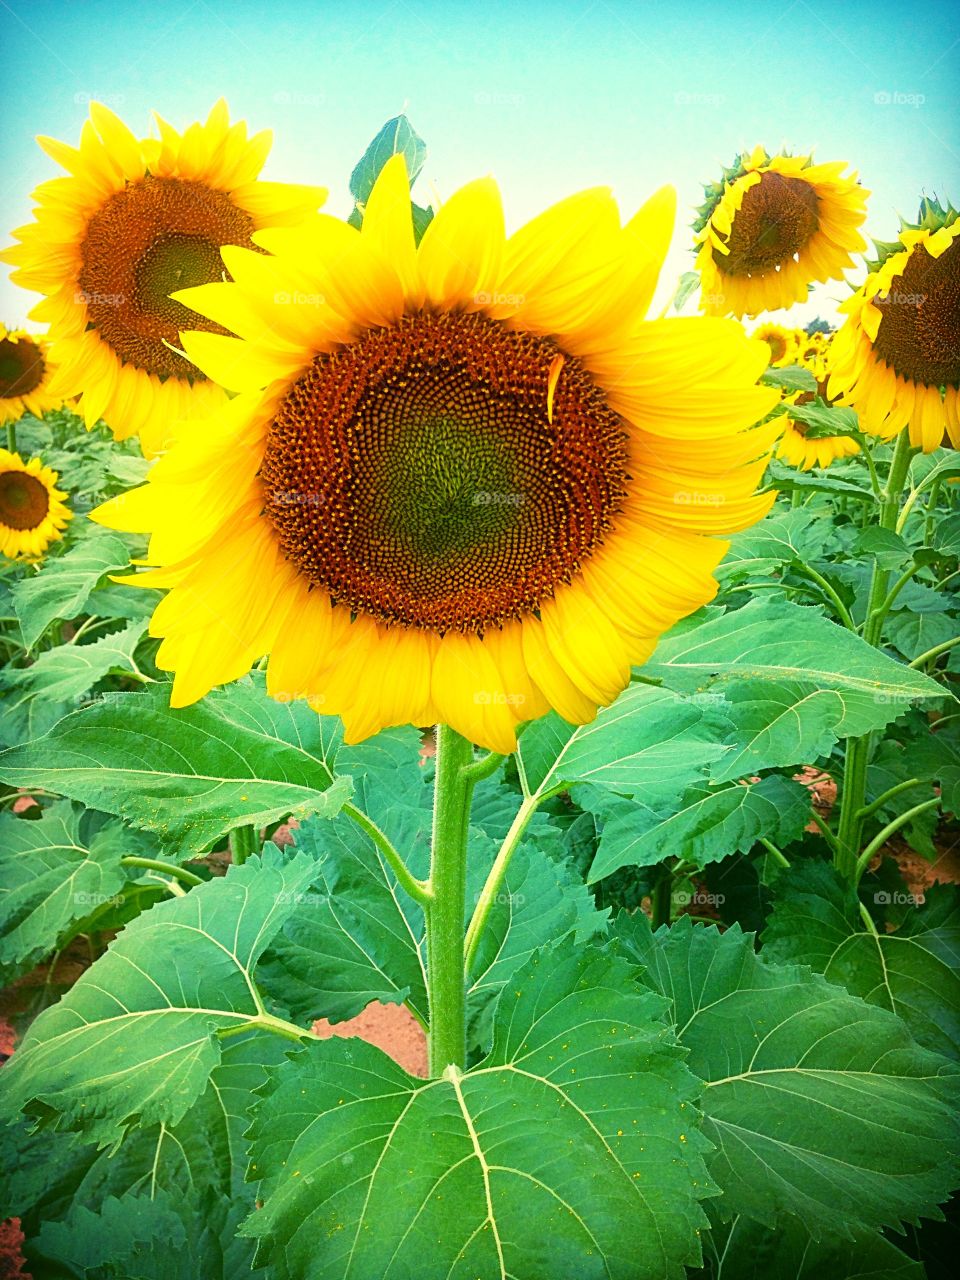 Group of sunflowers . Sometimes you can't have just one up close picture, but you need several in the picture. 